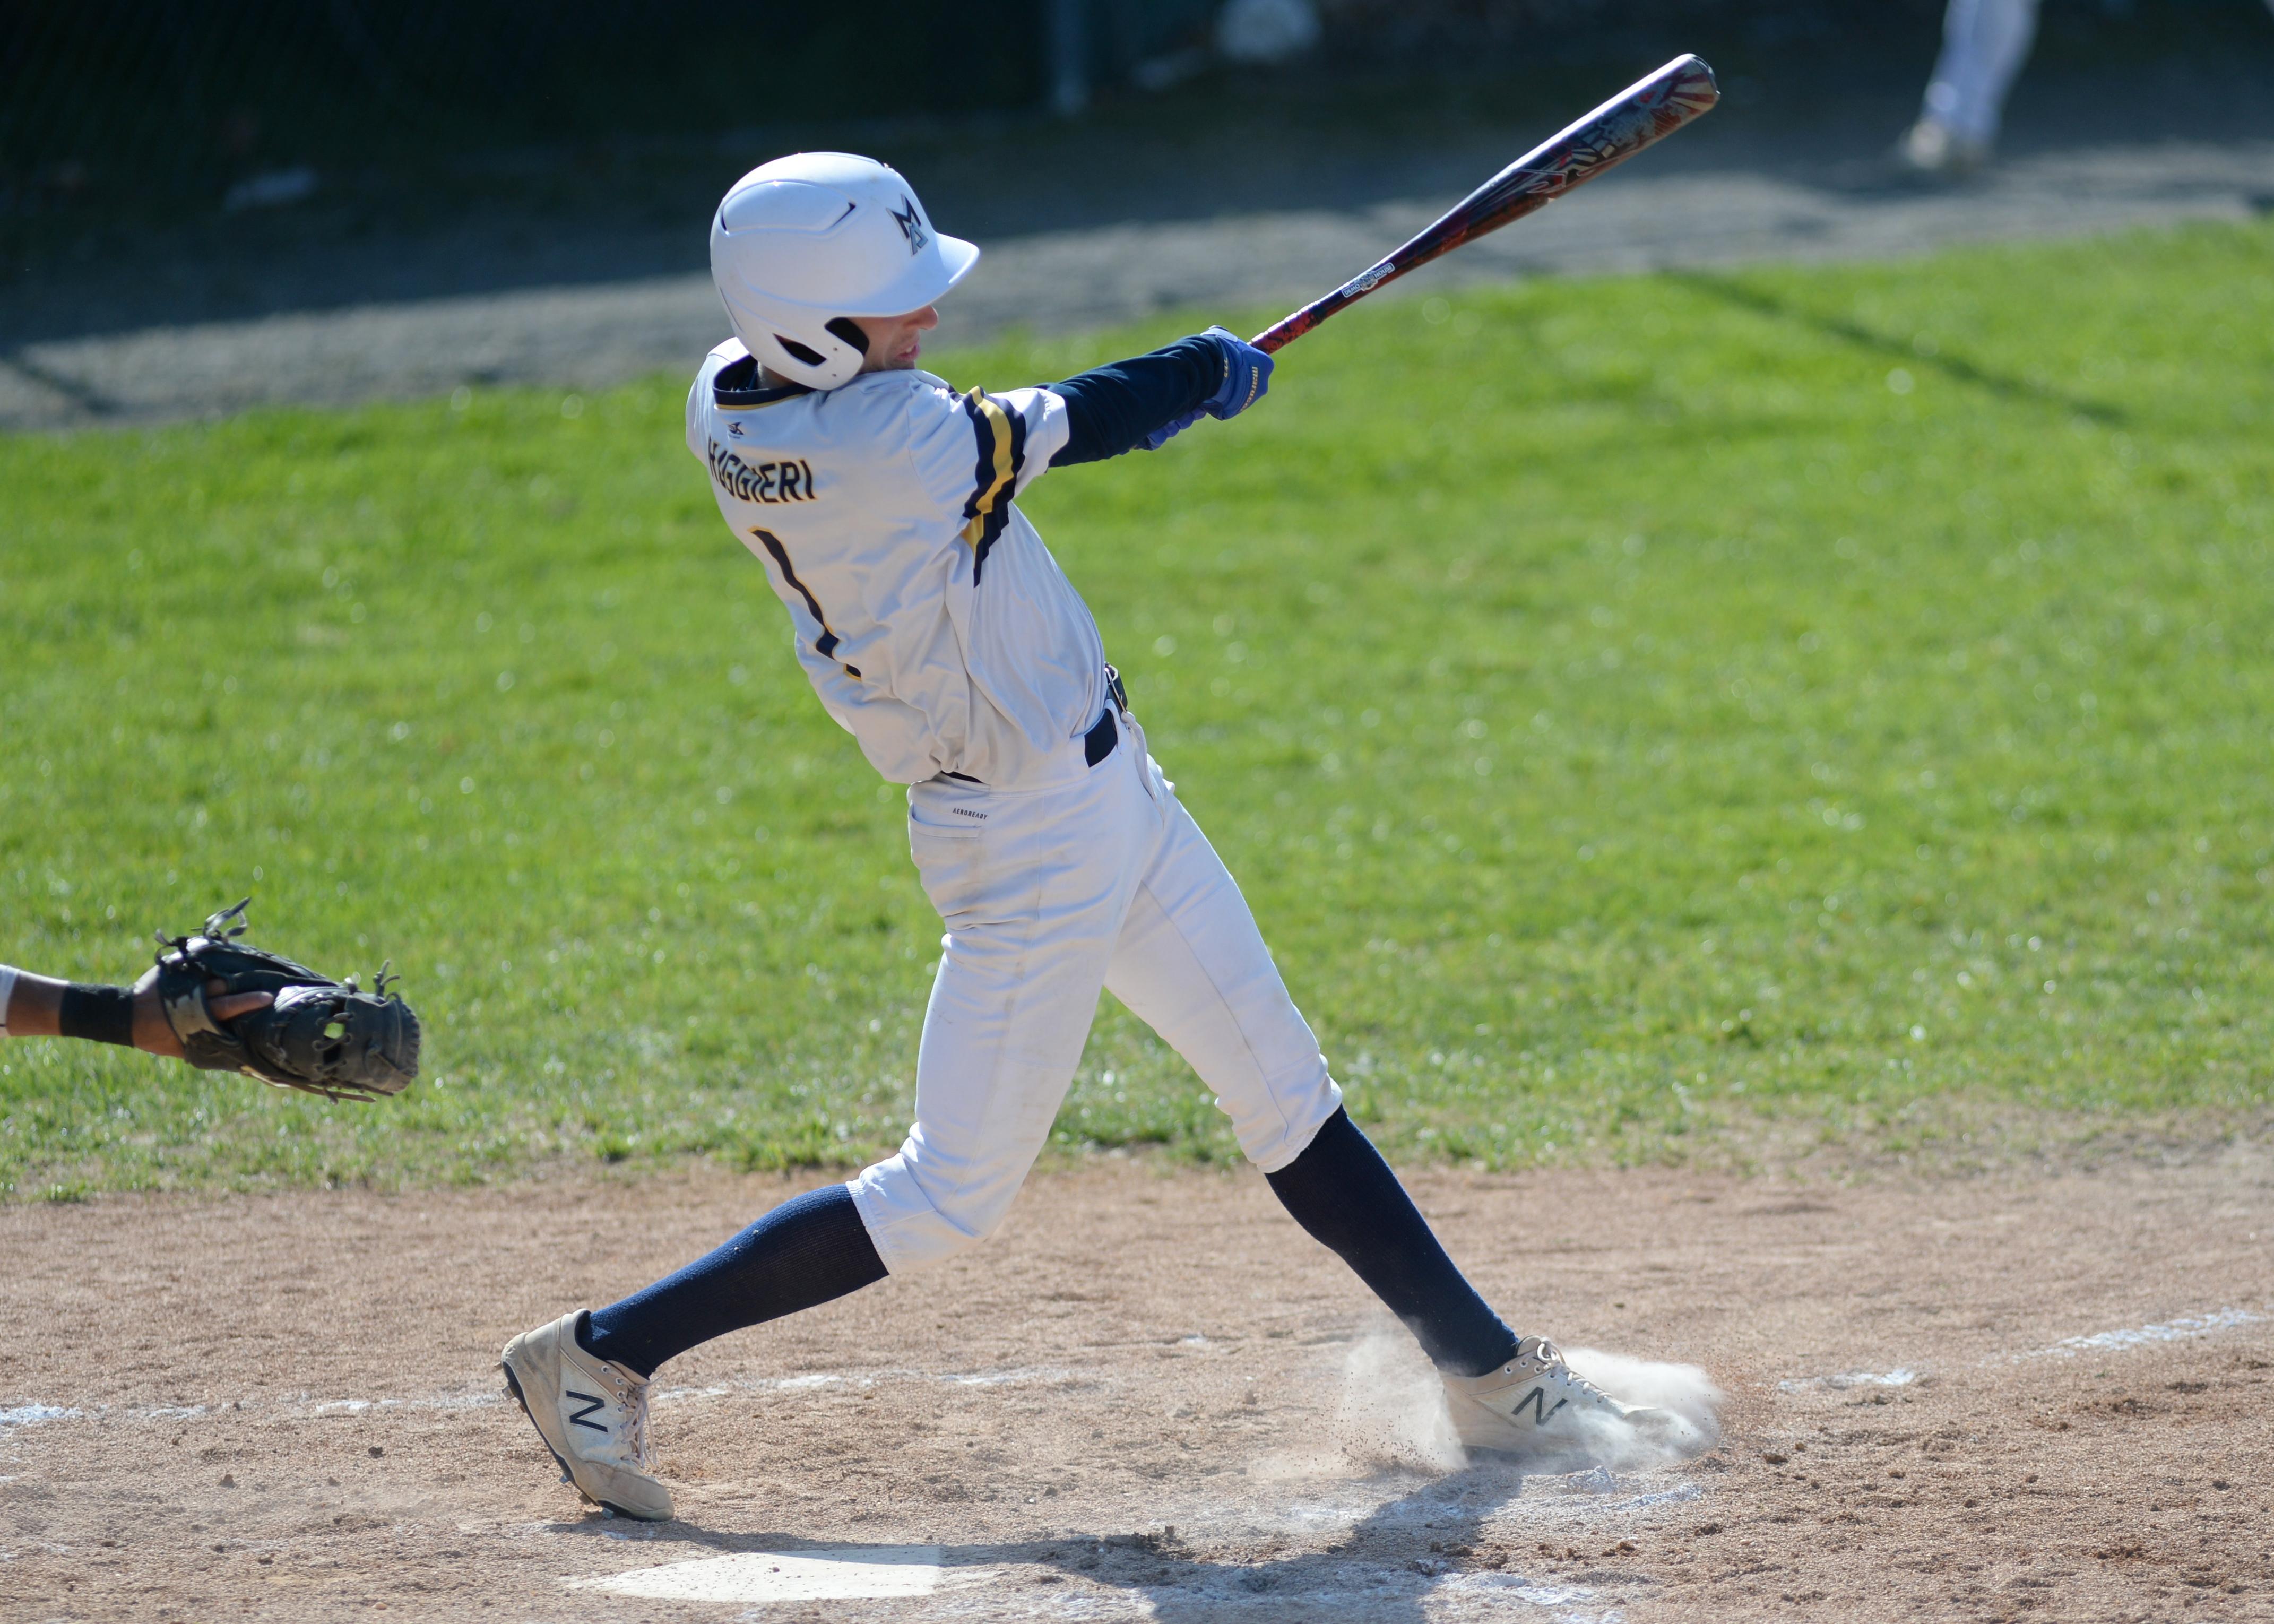 South Jersey South Shore Baseball League 2023 Preview: 2-time defending  champ S.J. Surf remains the team to beat - South Jersey Glory Days